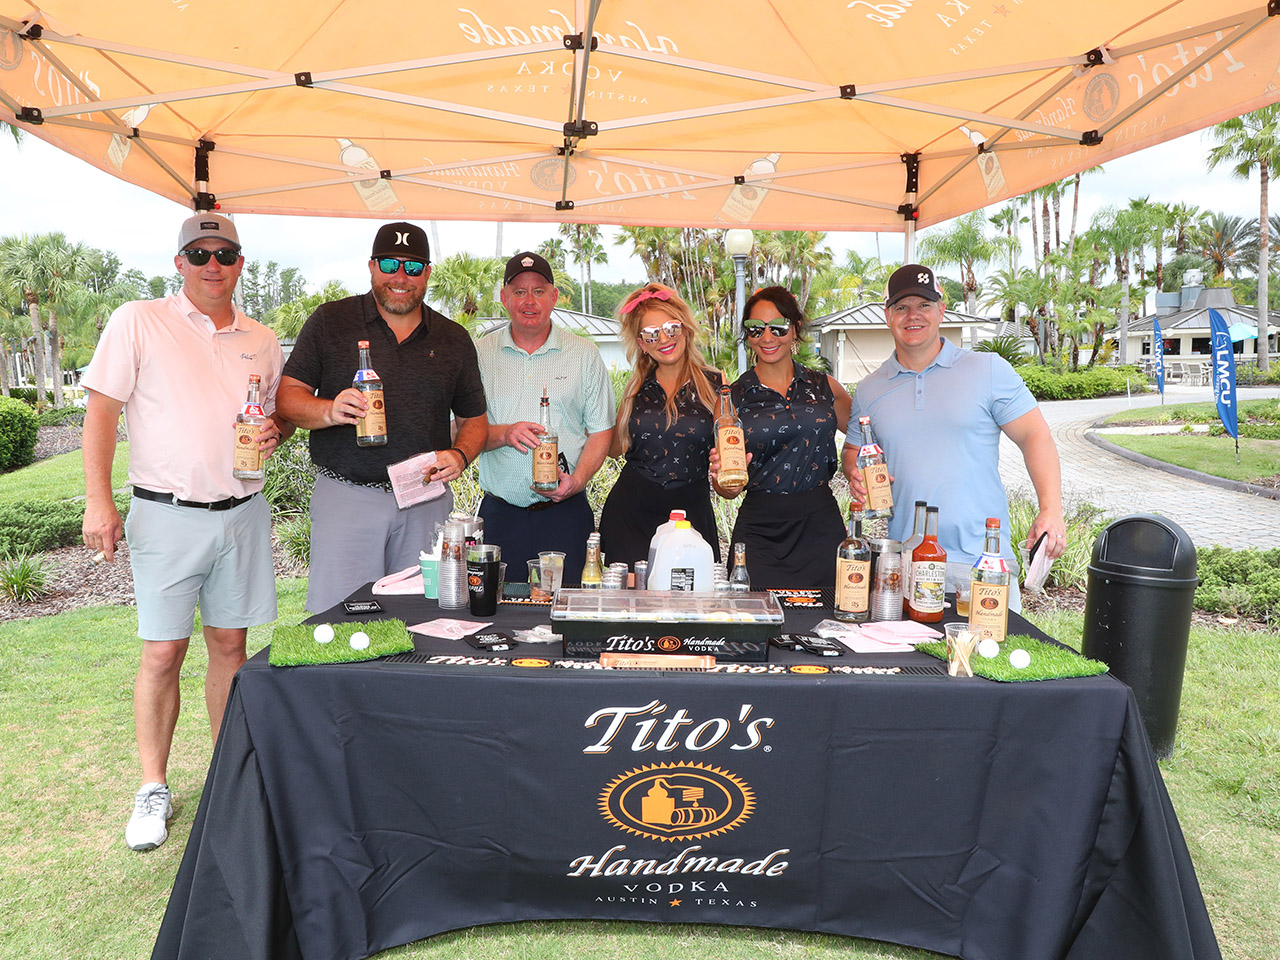 Tito's provided one of the drink stations on the golf course